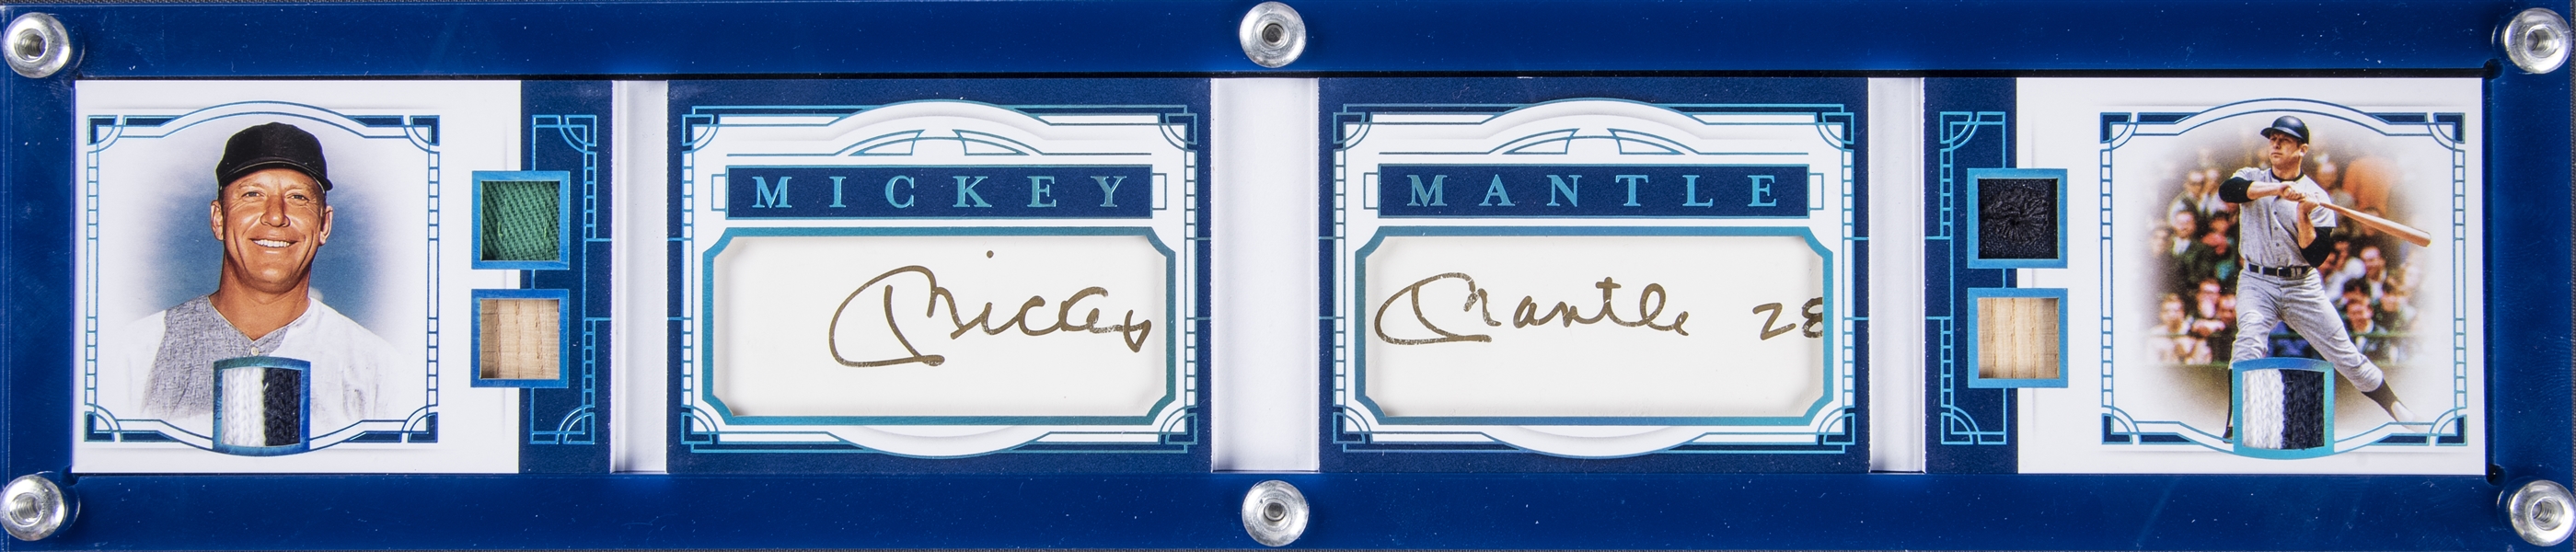 Charitybuzz: Yankee Legend Mickey Mantle Game Used Bat Relic